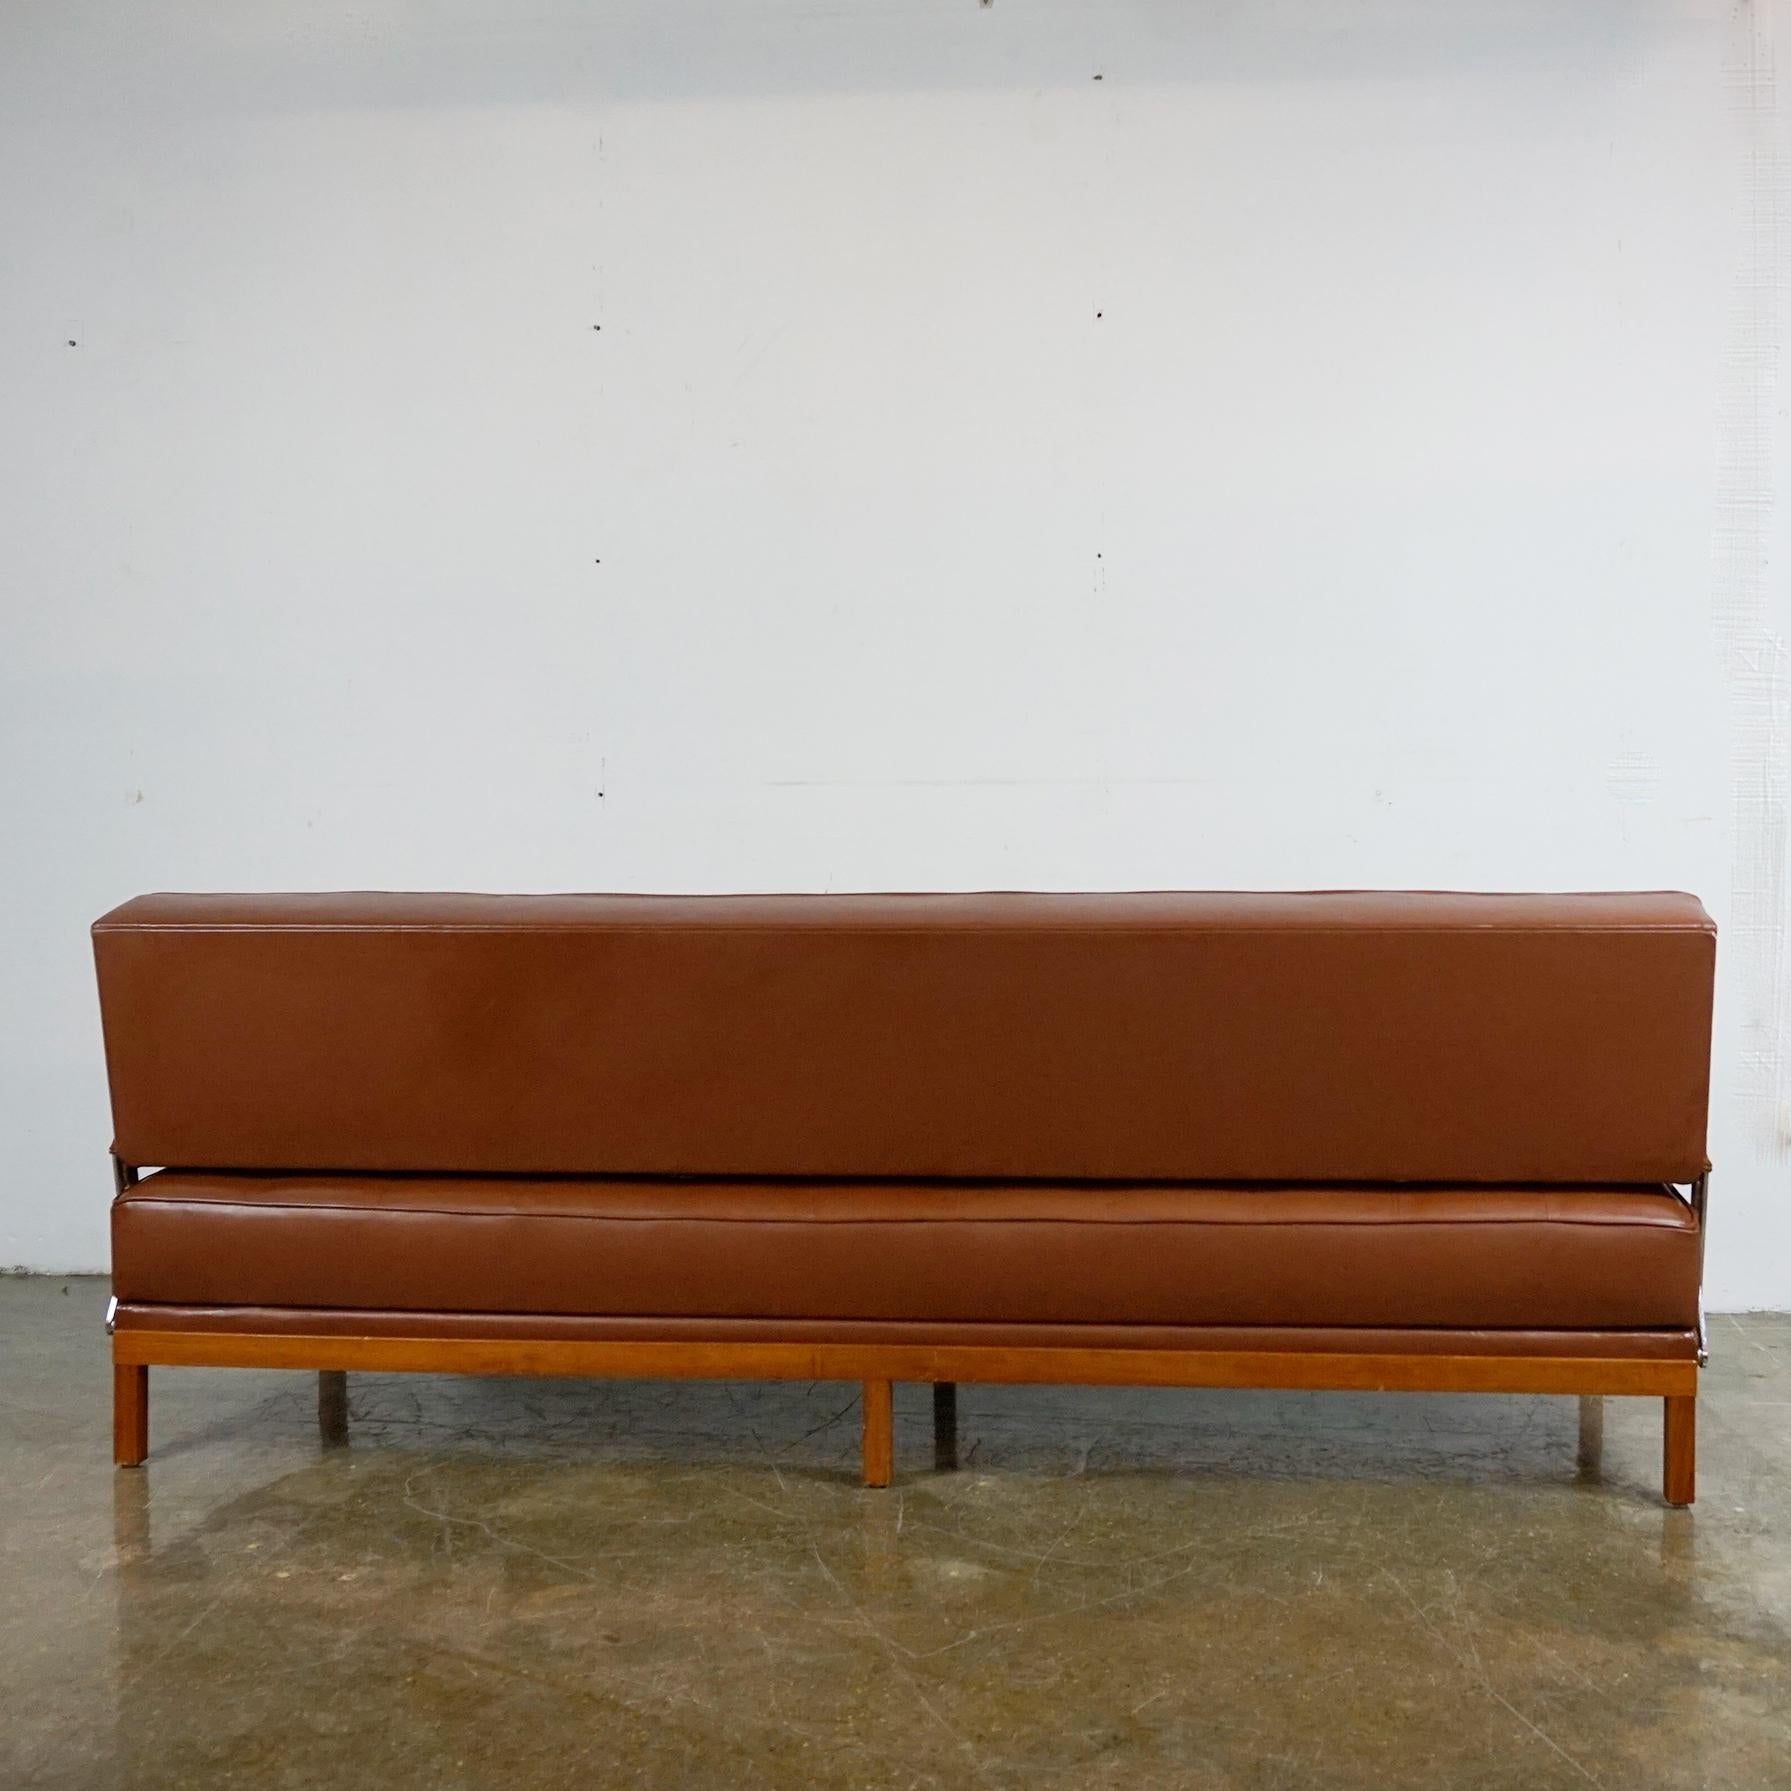 Metal Mid-Century Modern Cognac Leather Sofa or Daybed by Johannes Spalt for Wittmann